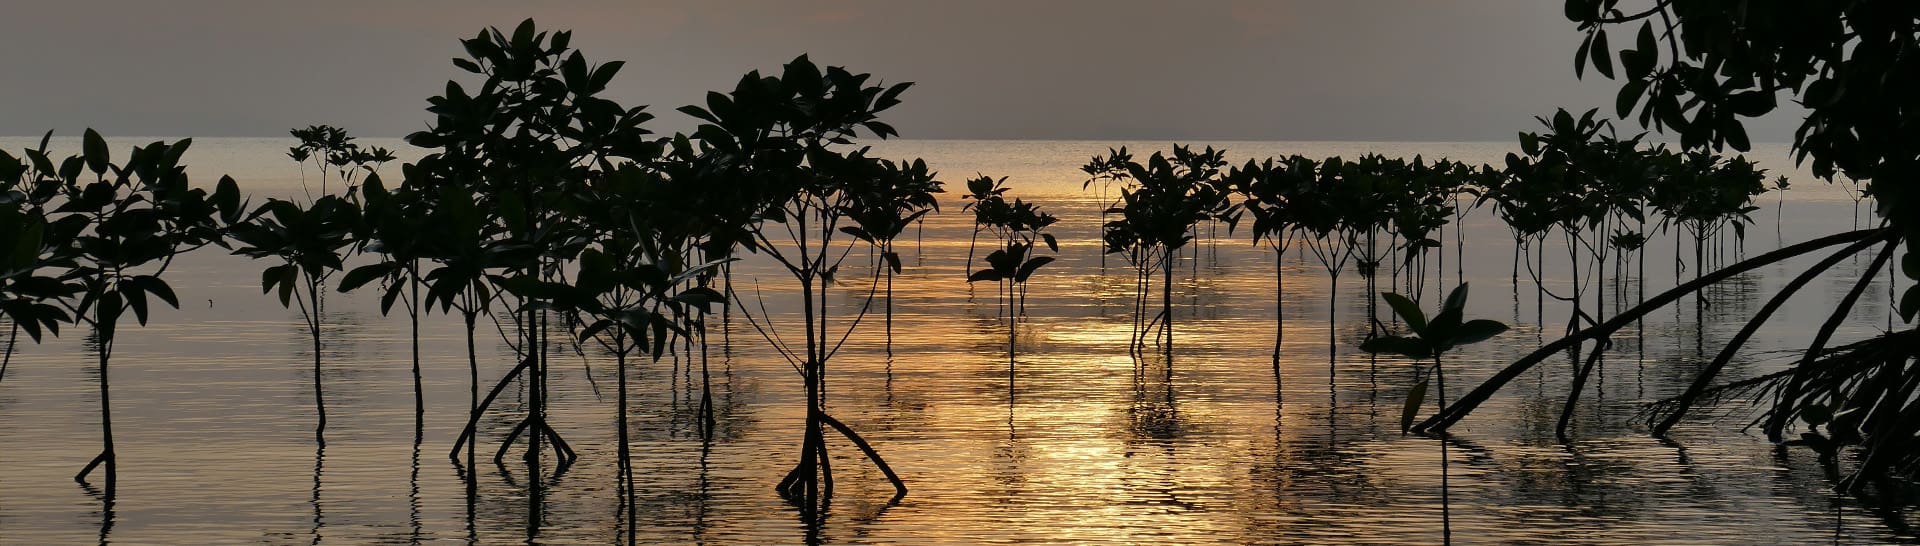 Mangroves silhouetted against a sunset.